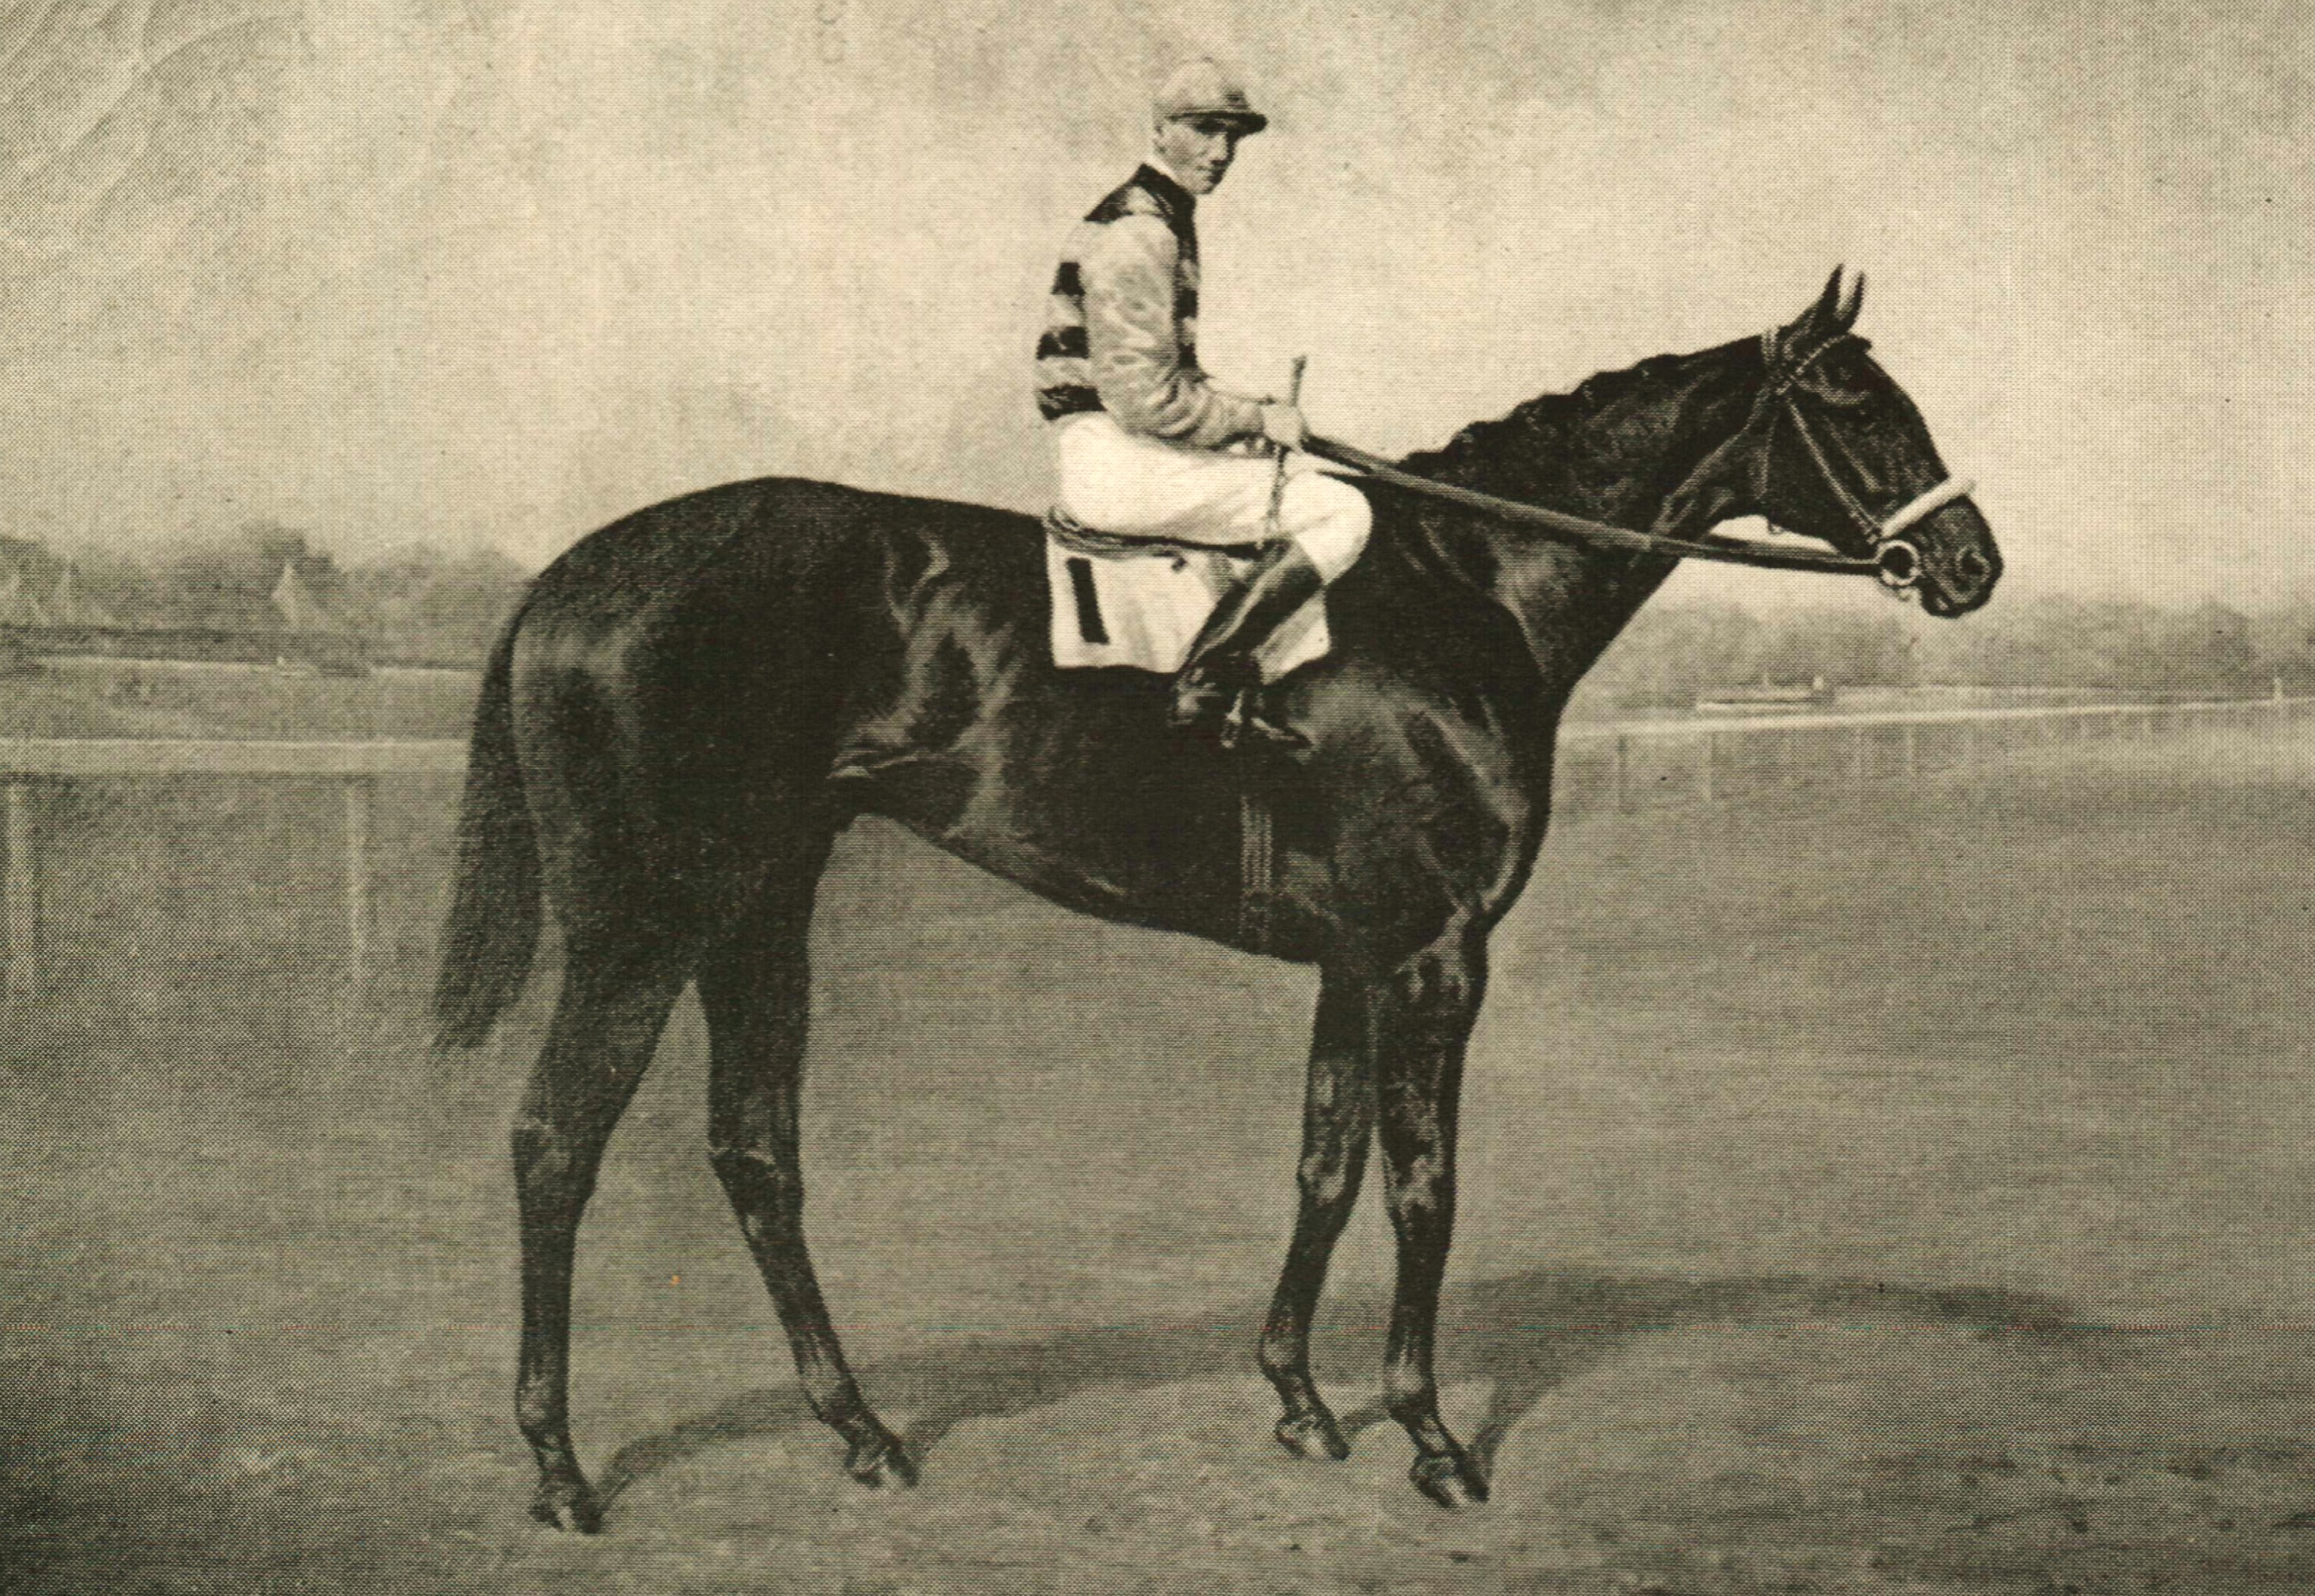 A likeness of Billy Kelly (Keeneland Library Collection)